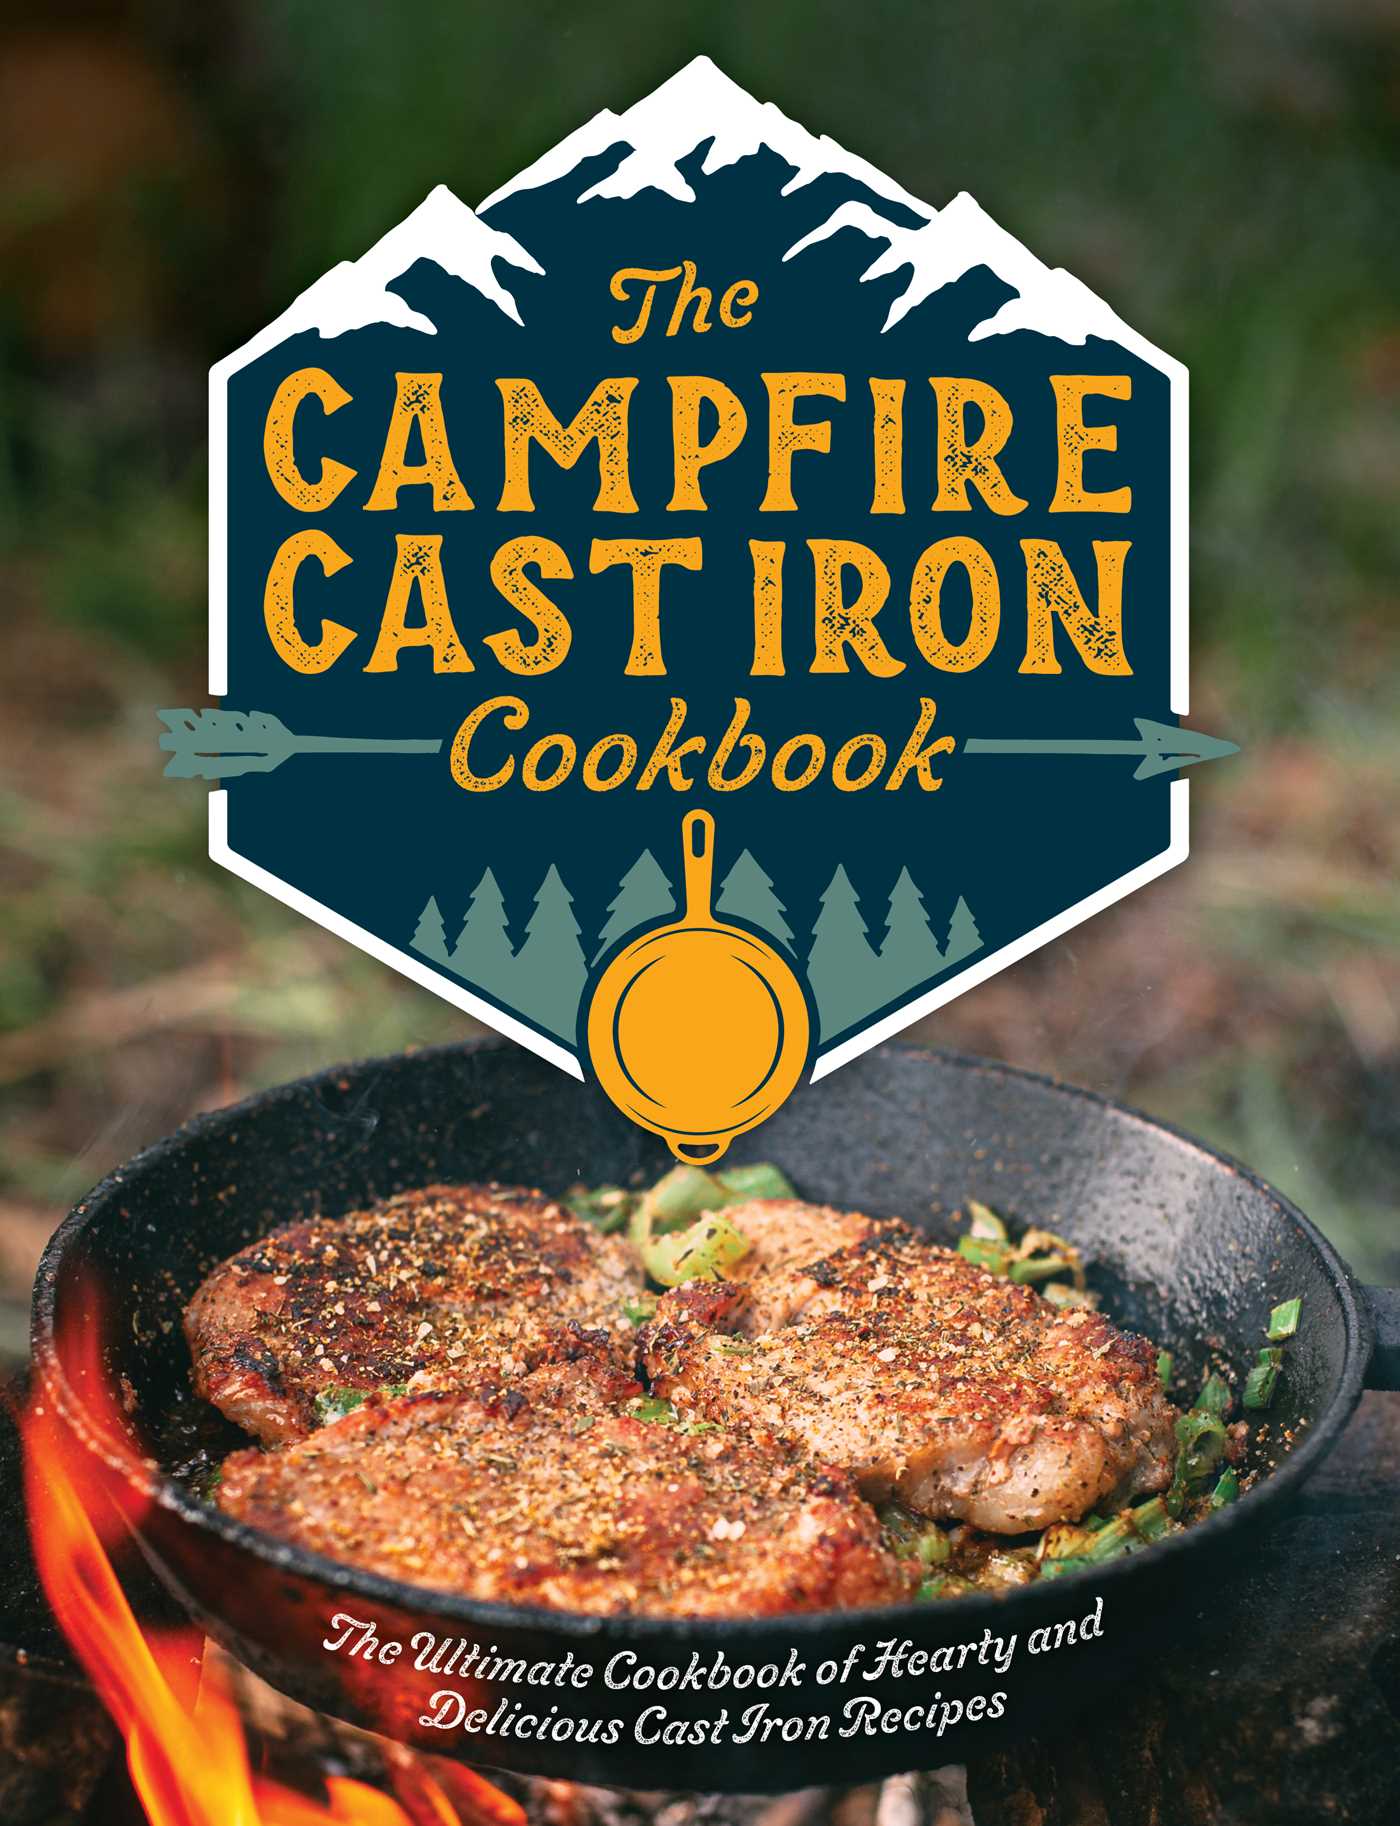 Image for "The Campfire Cast Iron Cookbook"